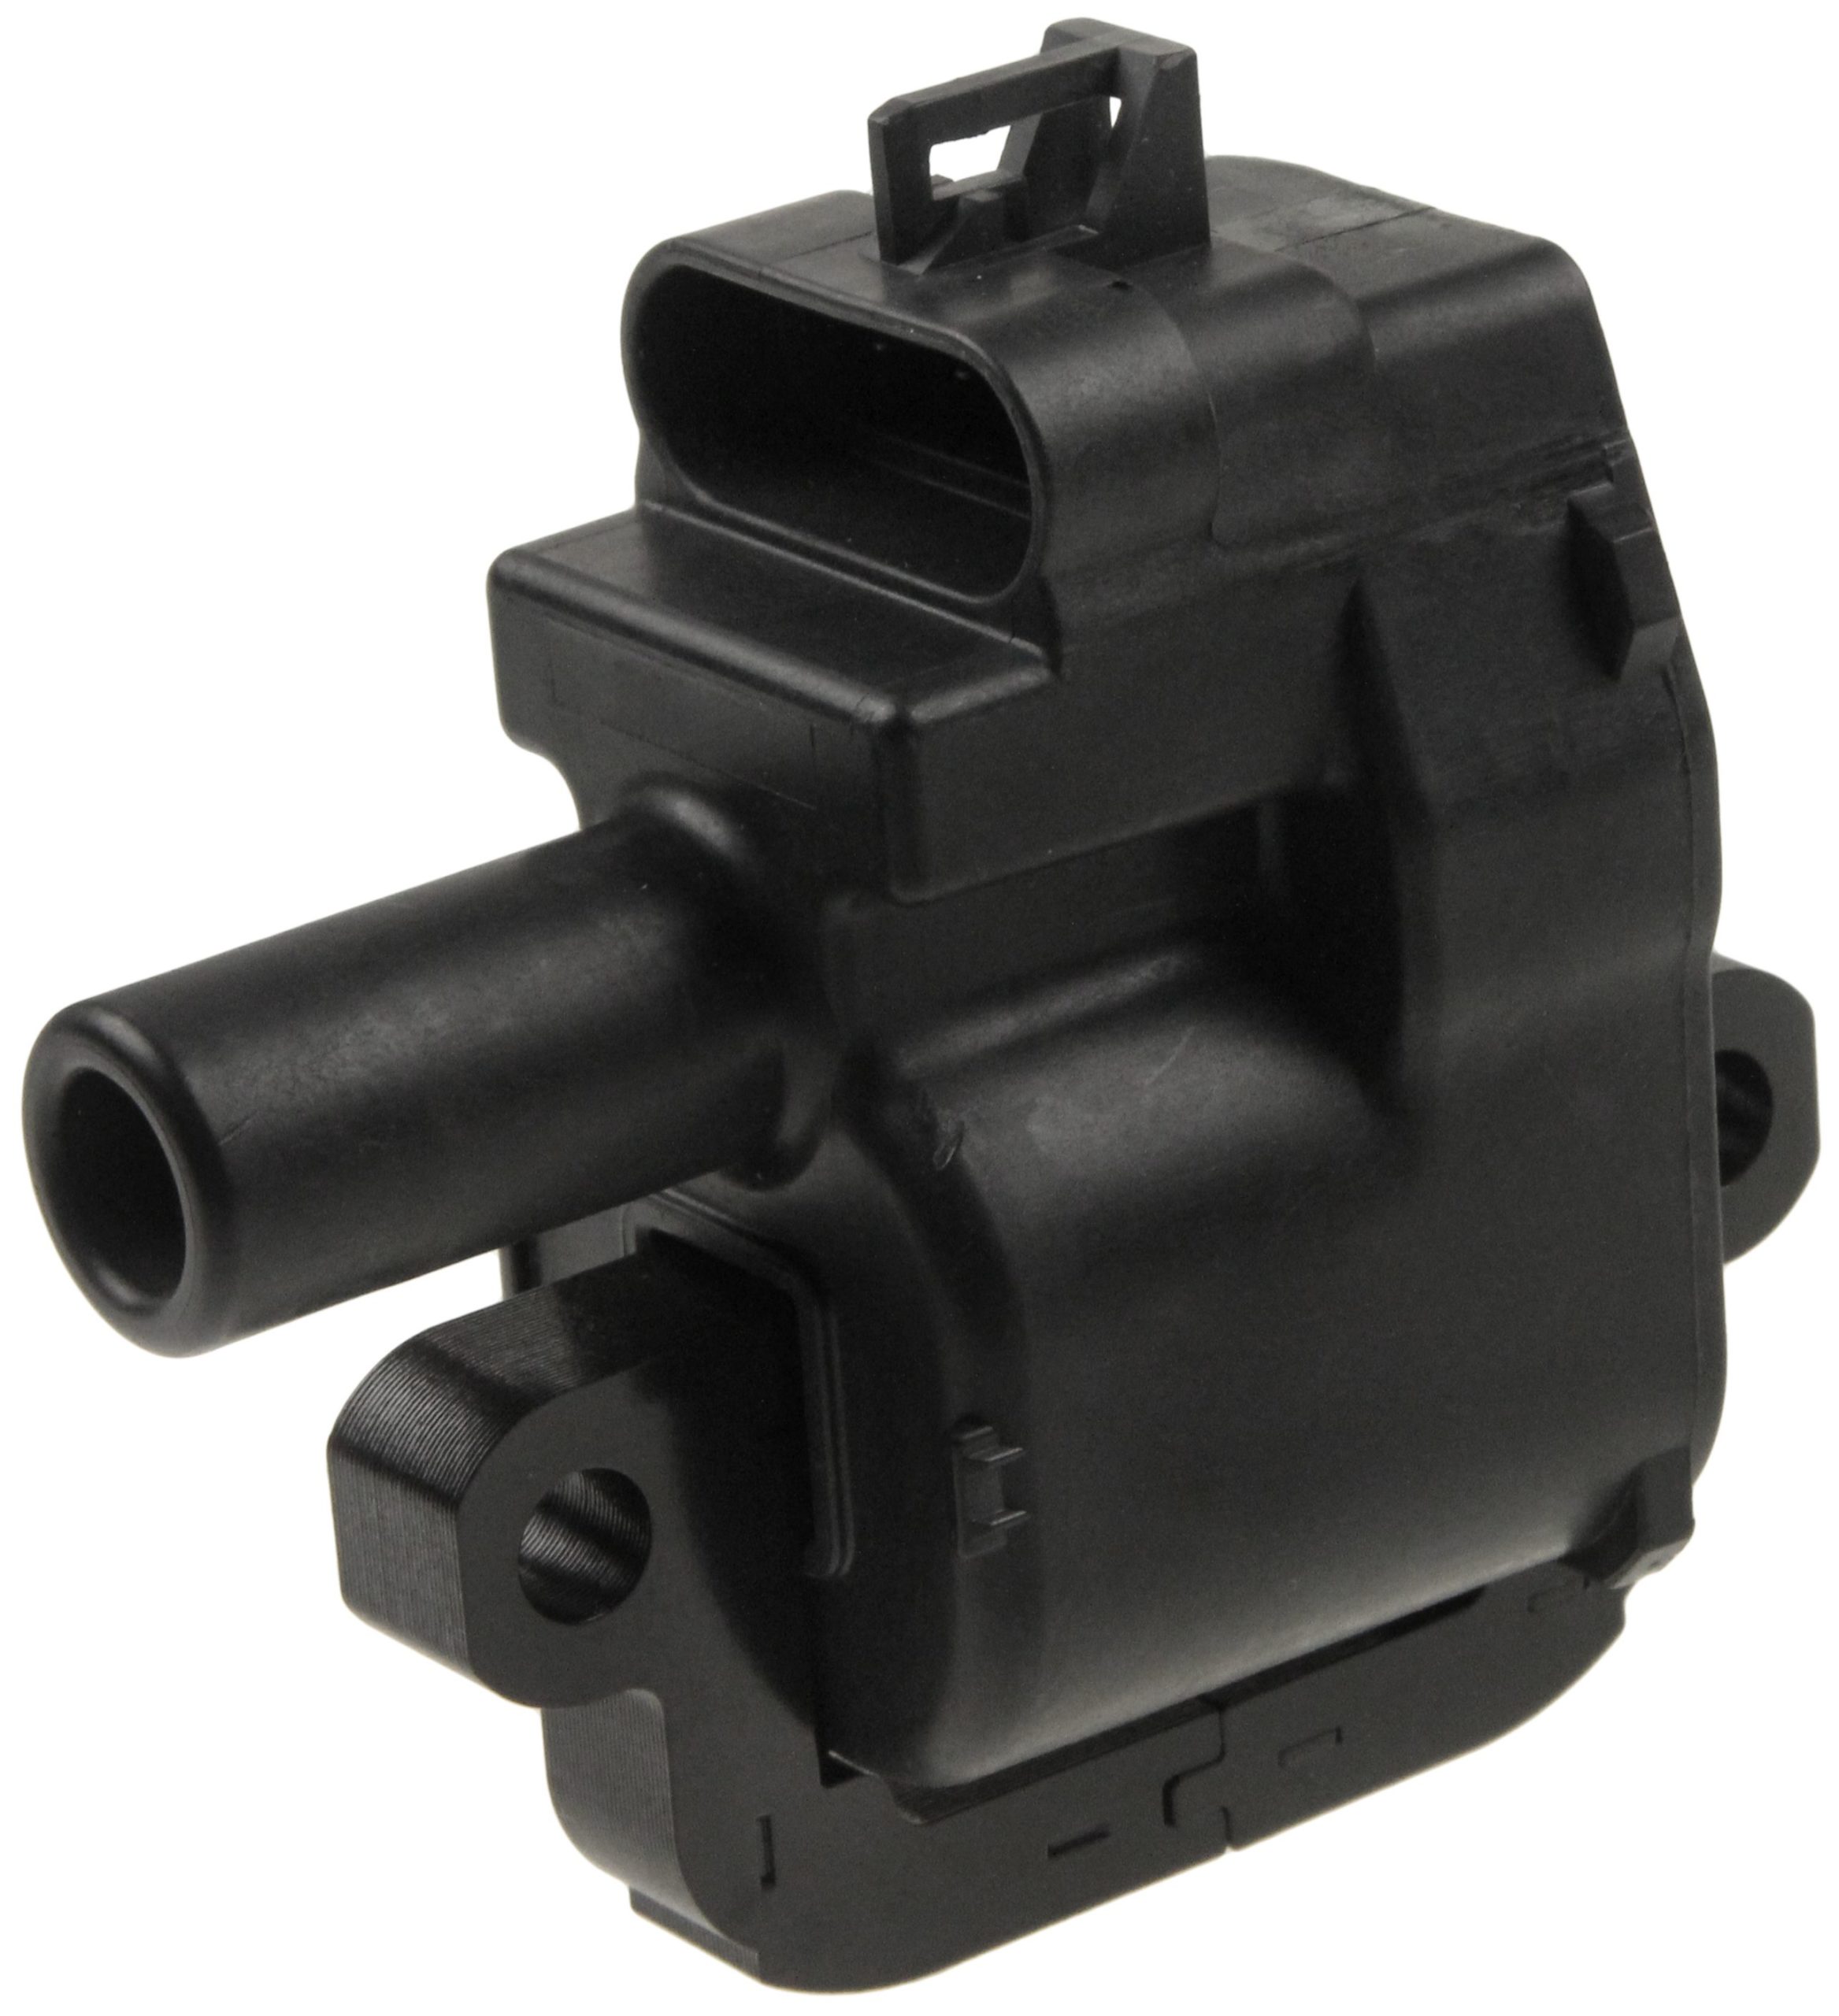 Example of a Ignition coil